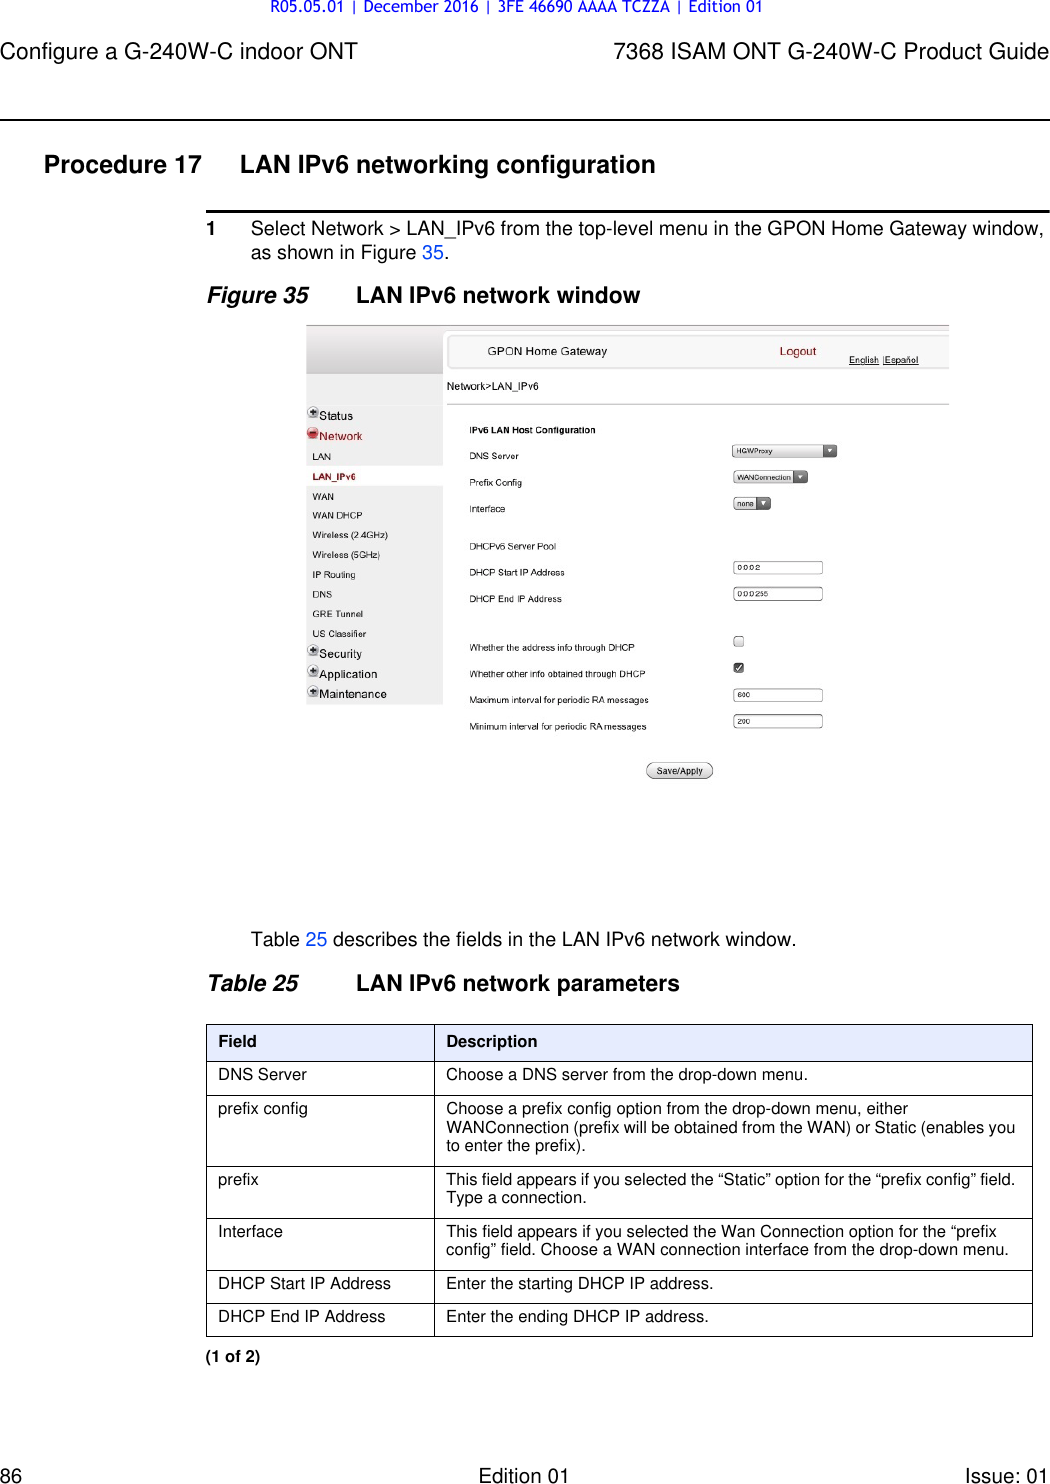 Page 86 of Nokia Bell G240W-C GPON ONU User Manual 7368 ISAM ONT G 240W B Product Guide